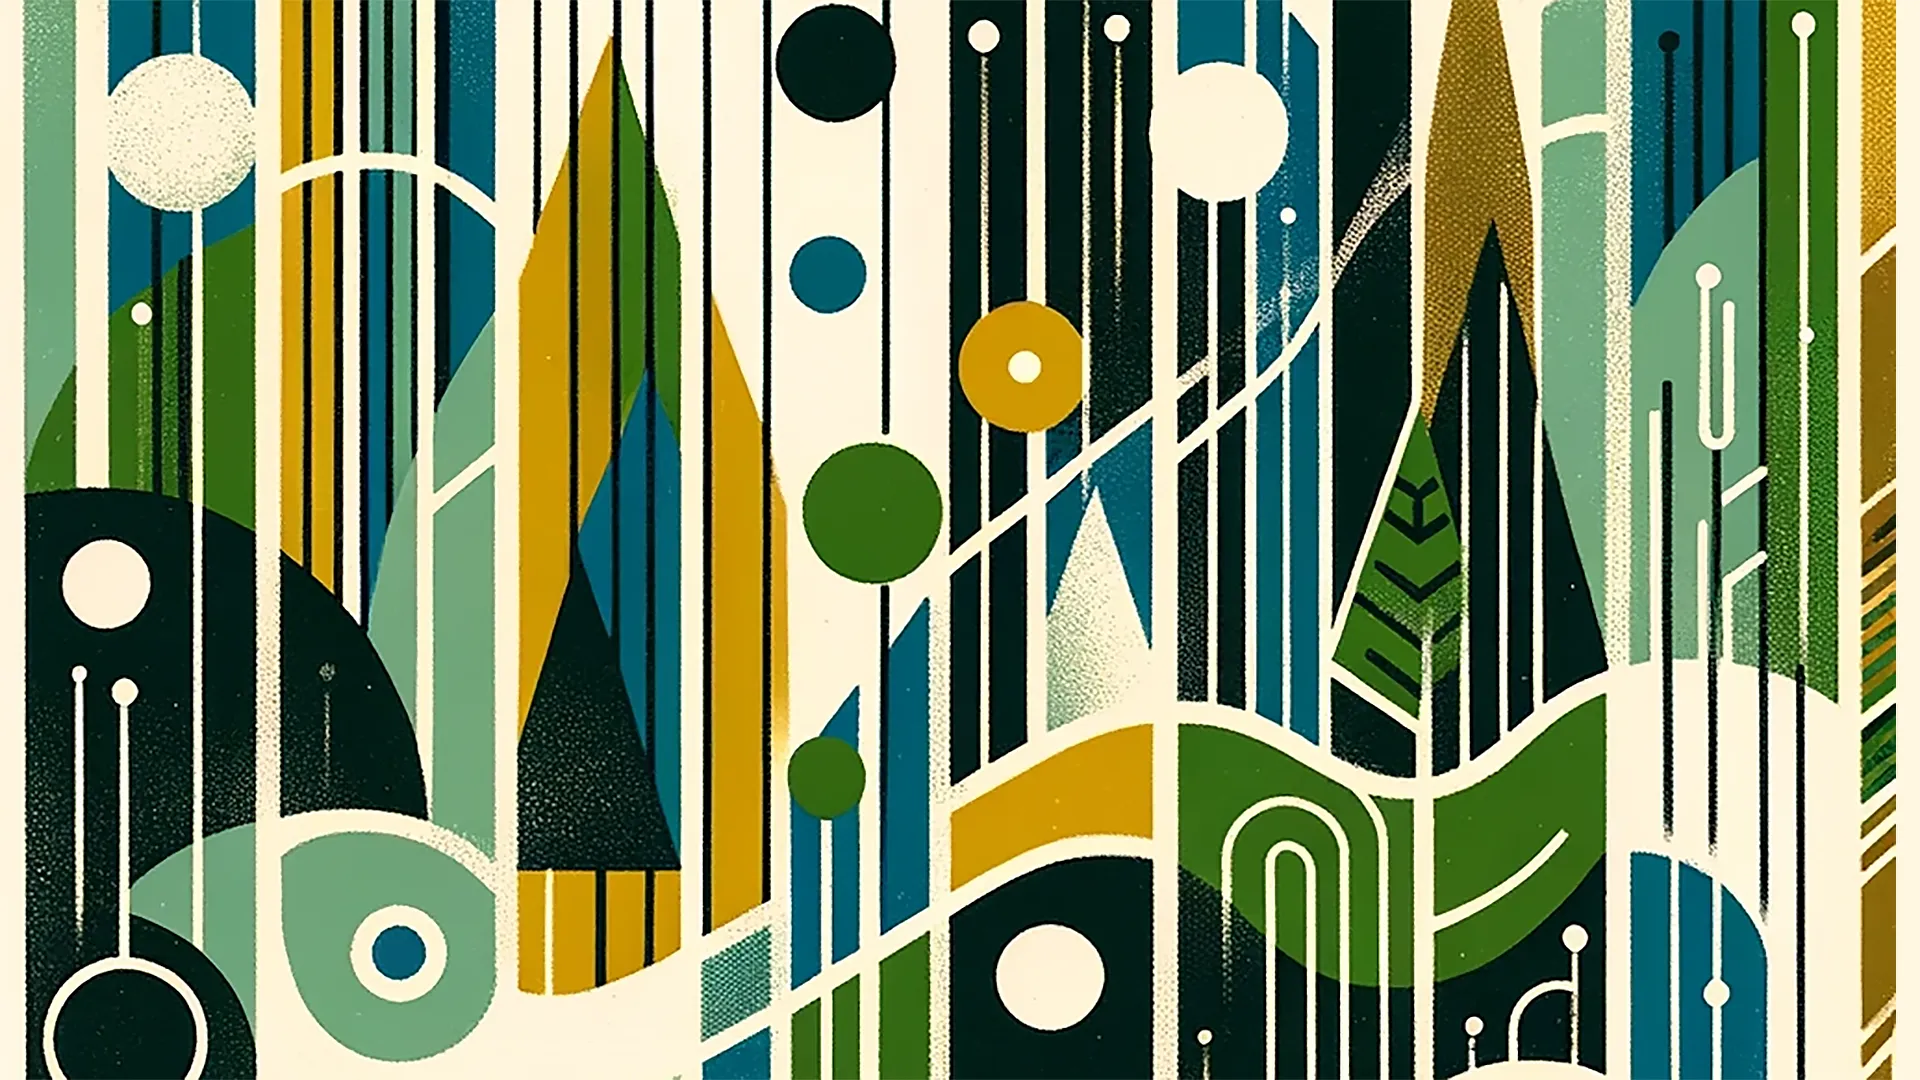 Illustration for the article representing navigating a complex path through a forest